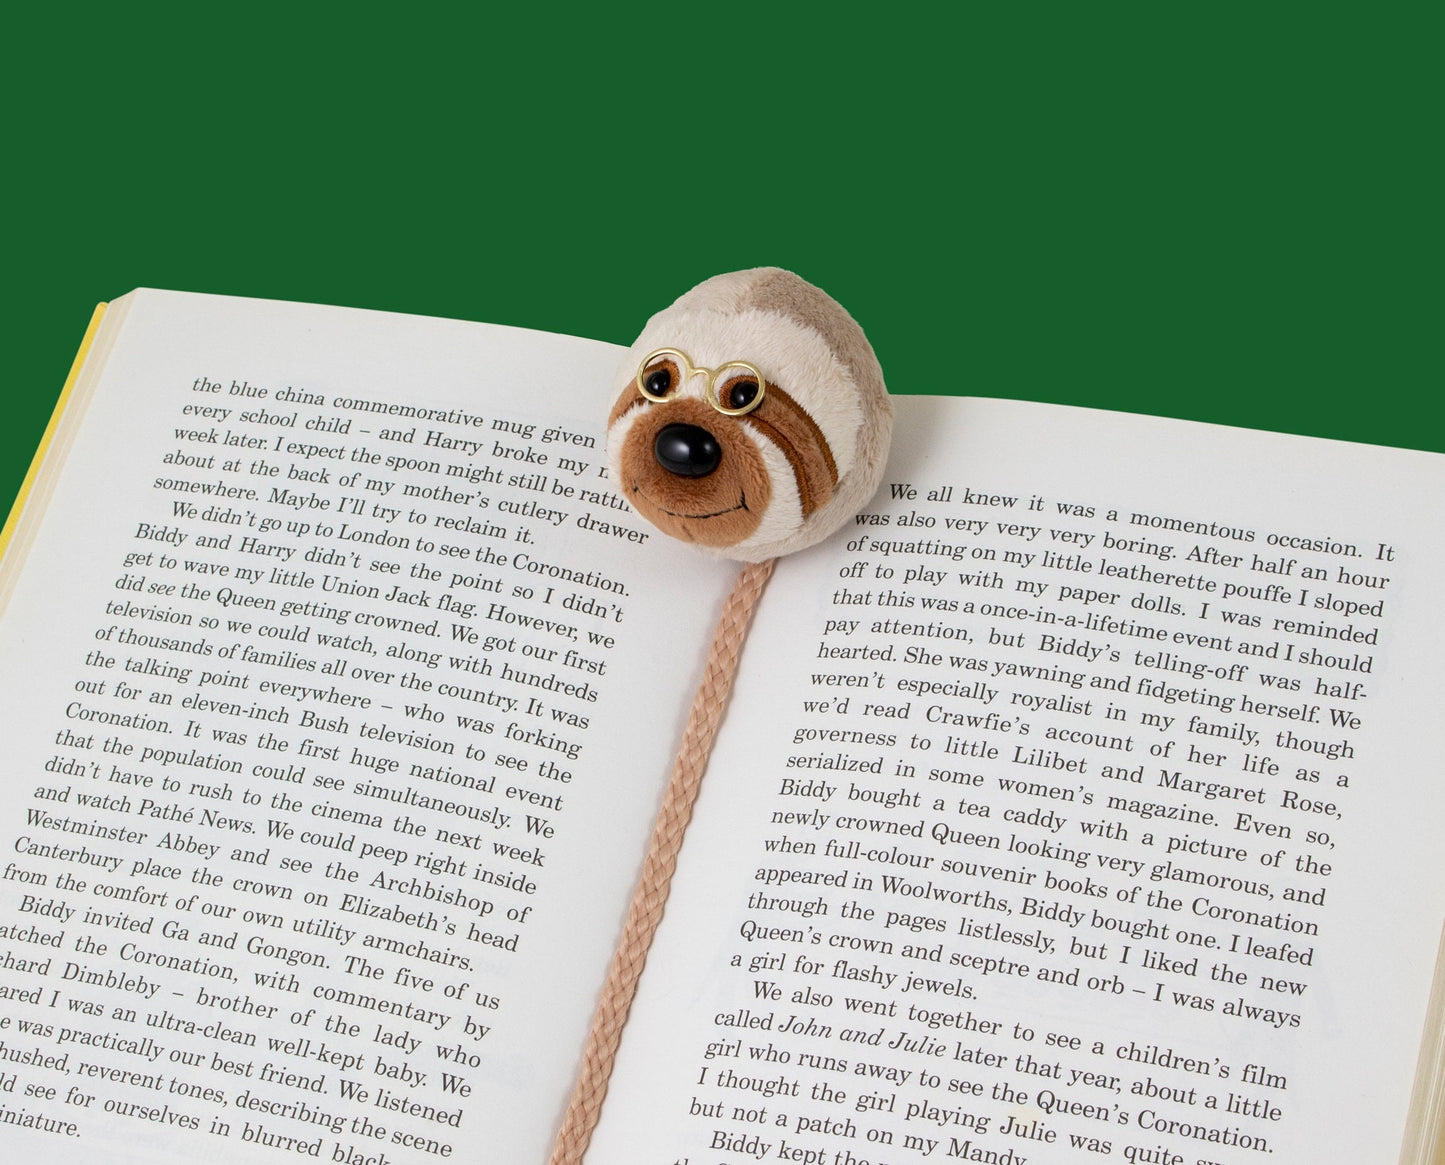 Book Tails Bookmarks - Unicorn or Sloth